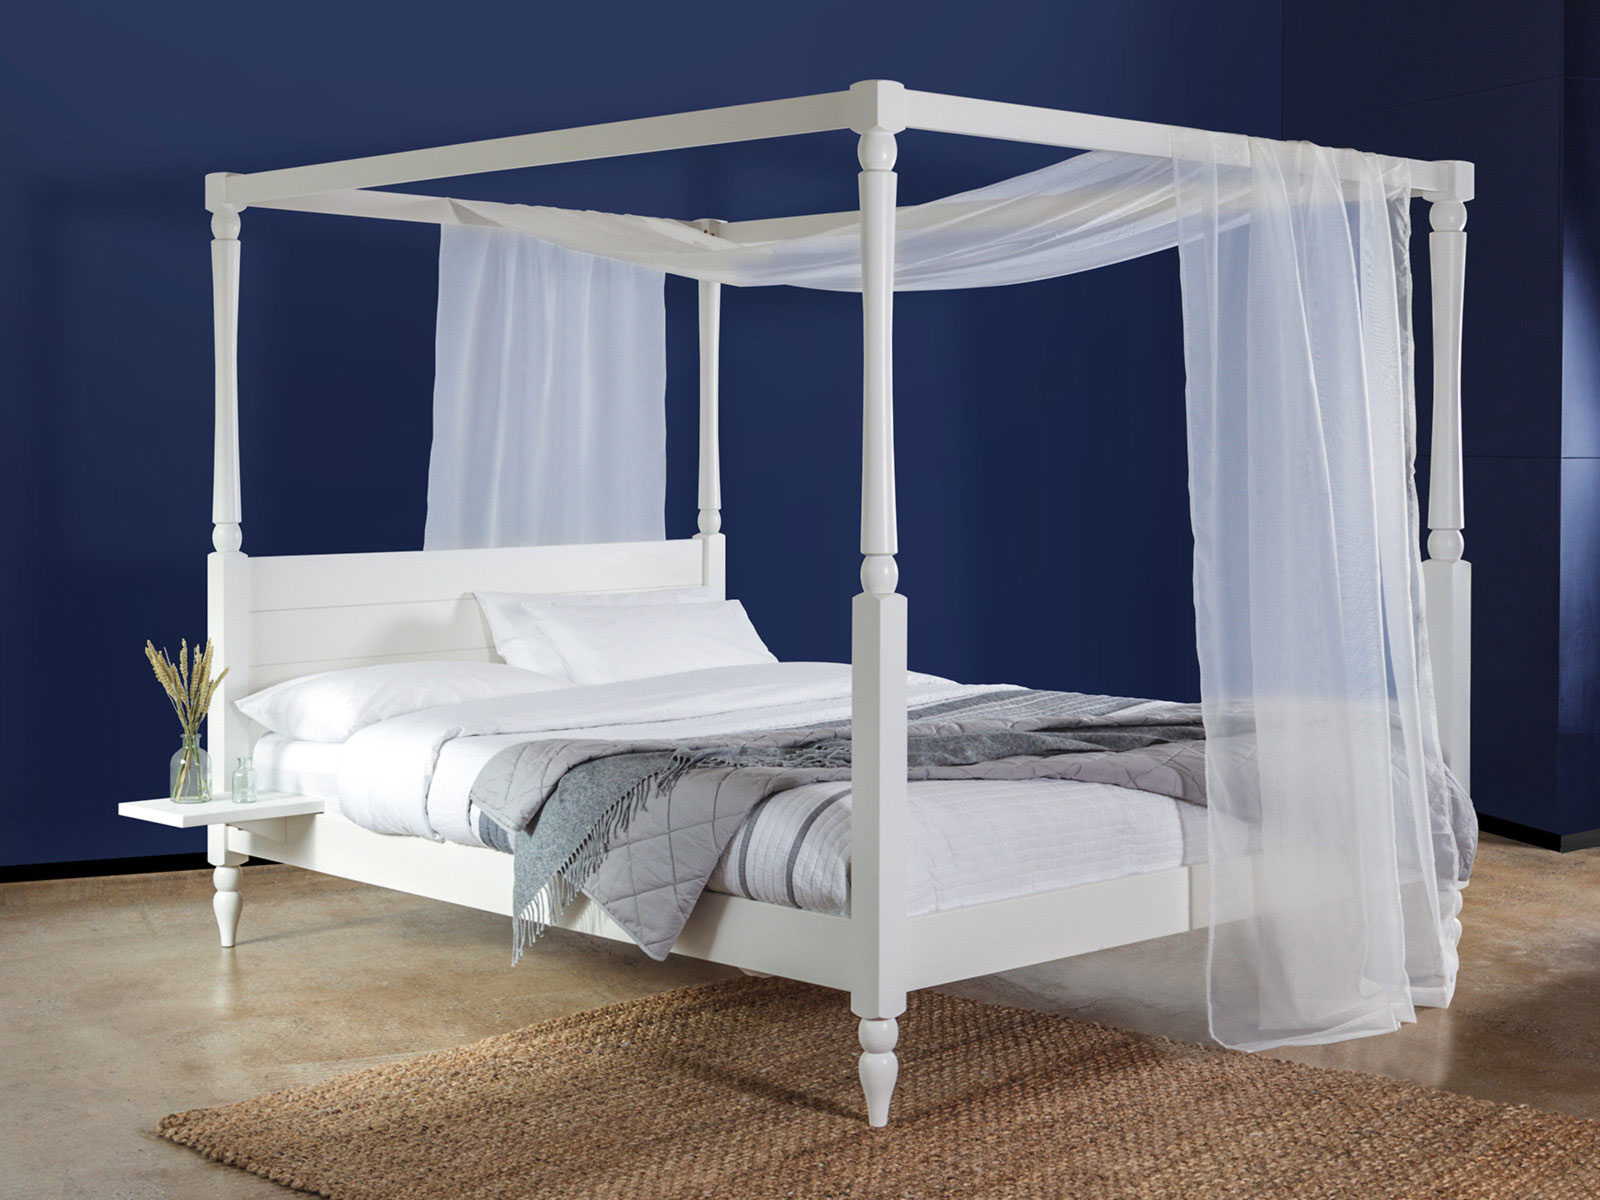 Four Poster Country Bed Get Laid Beds, White Four Poster Bed King Size